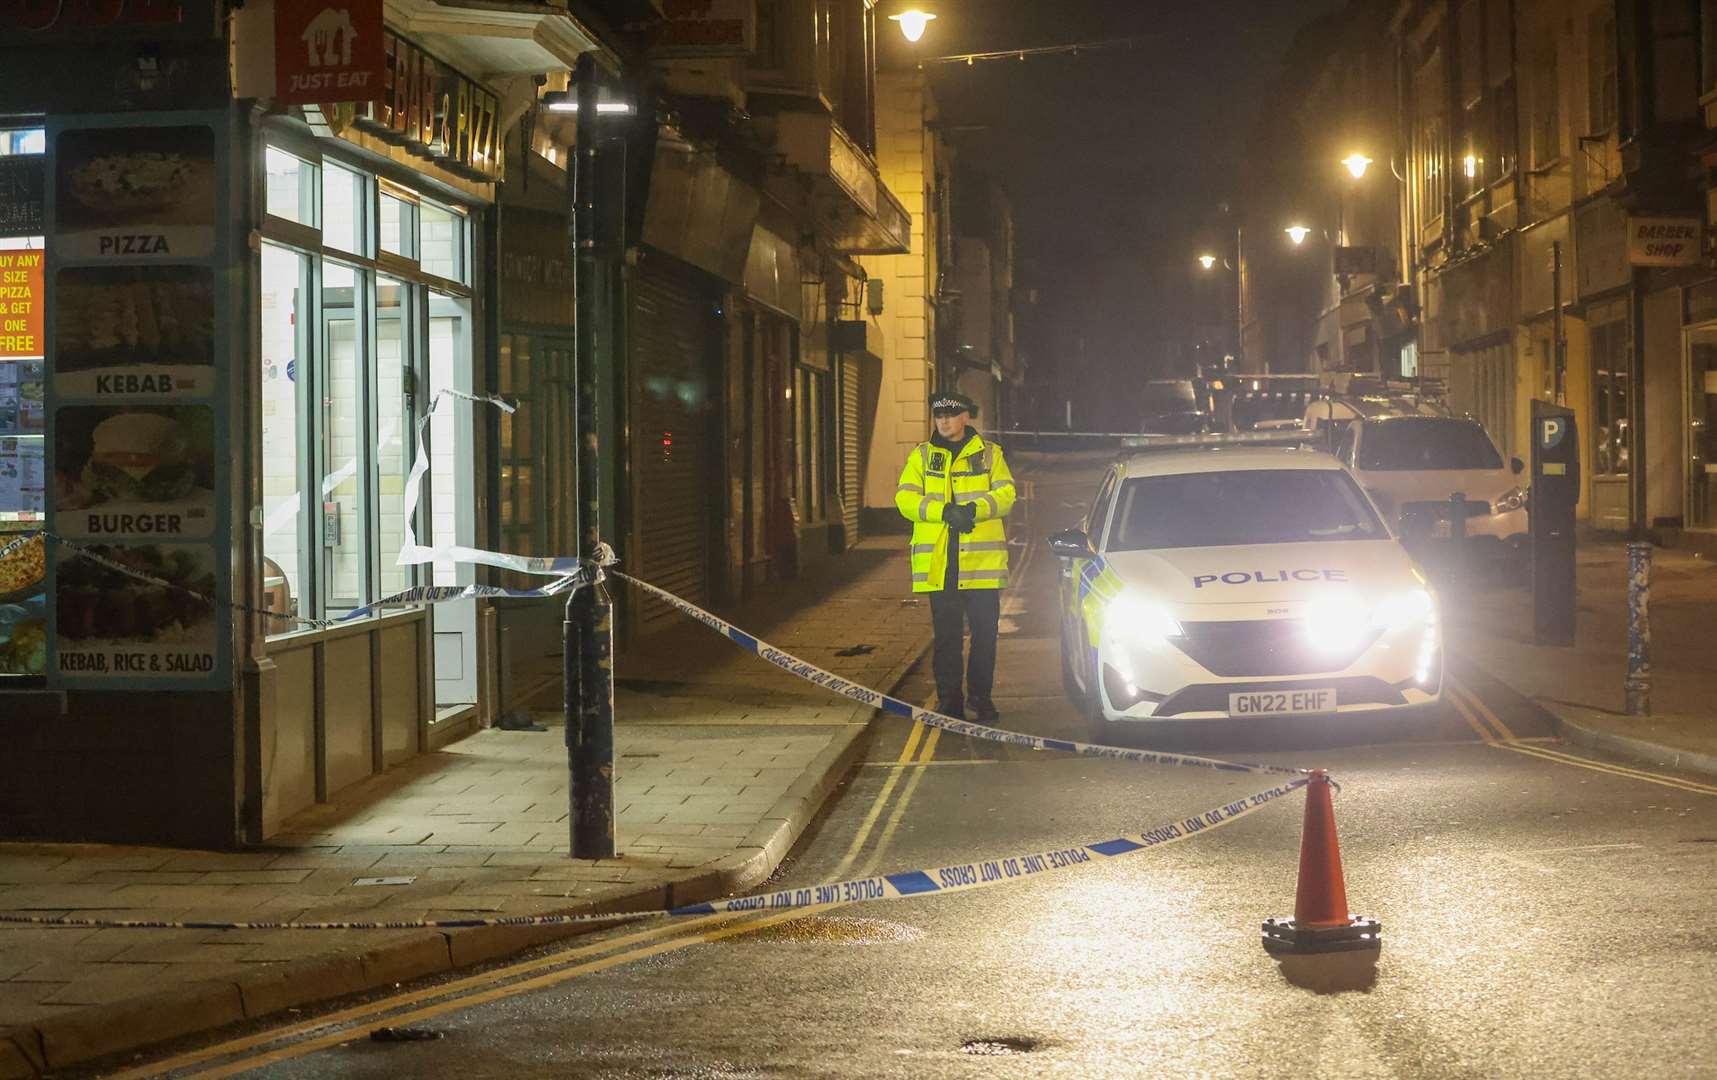 A man was stabbed in a brawl at a kebab shop in King Street in March. Picture: UKNIP